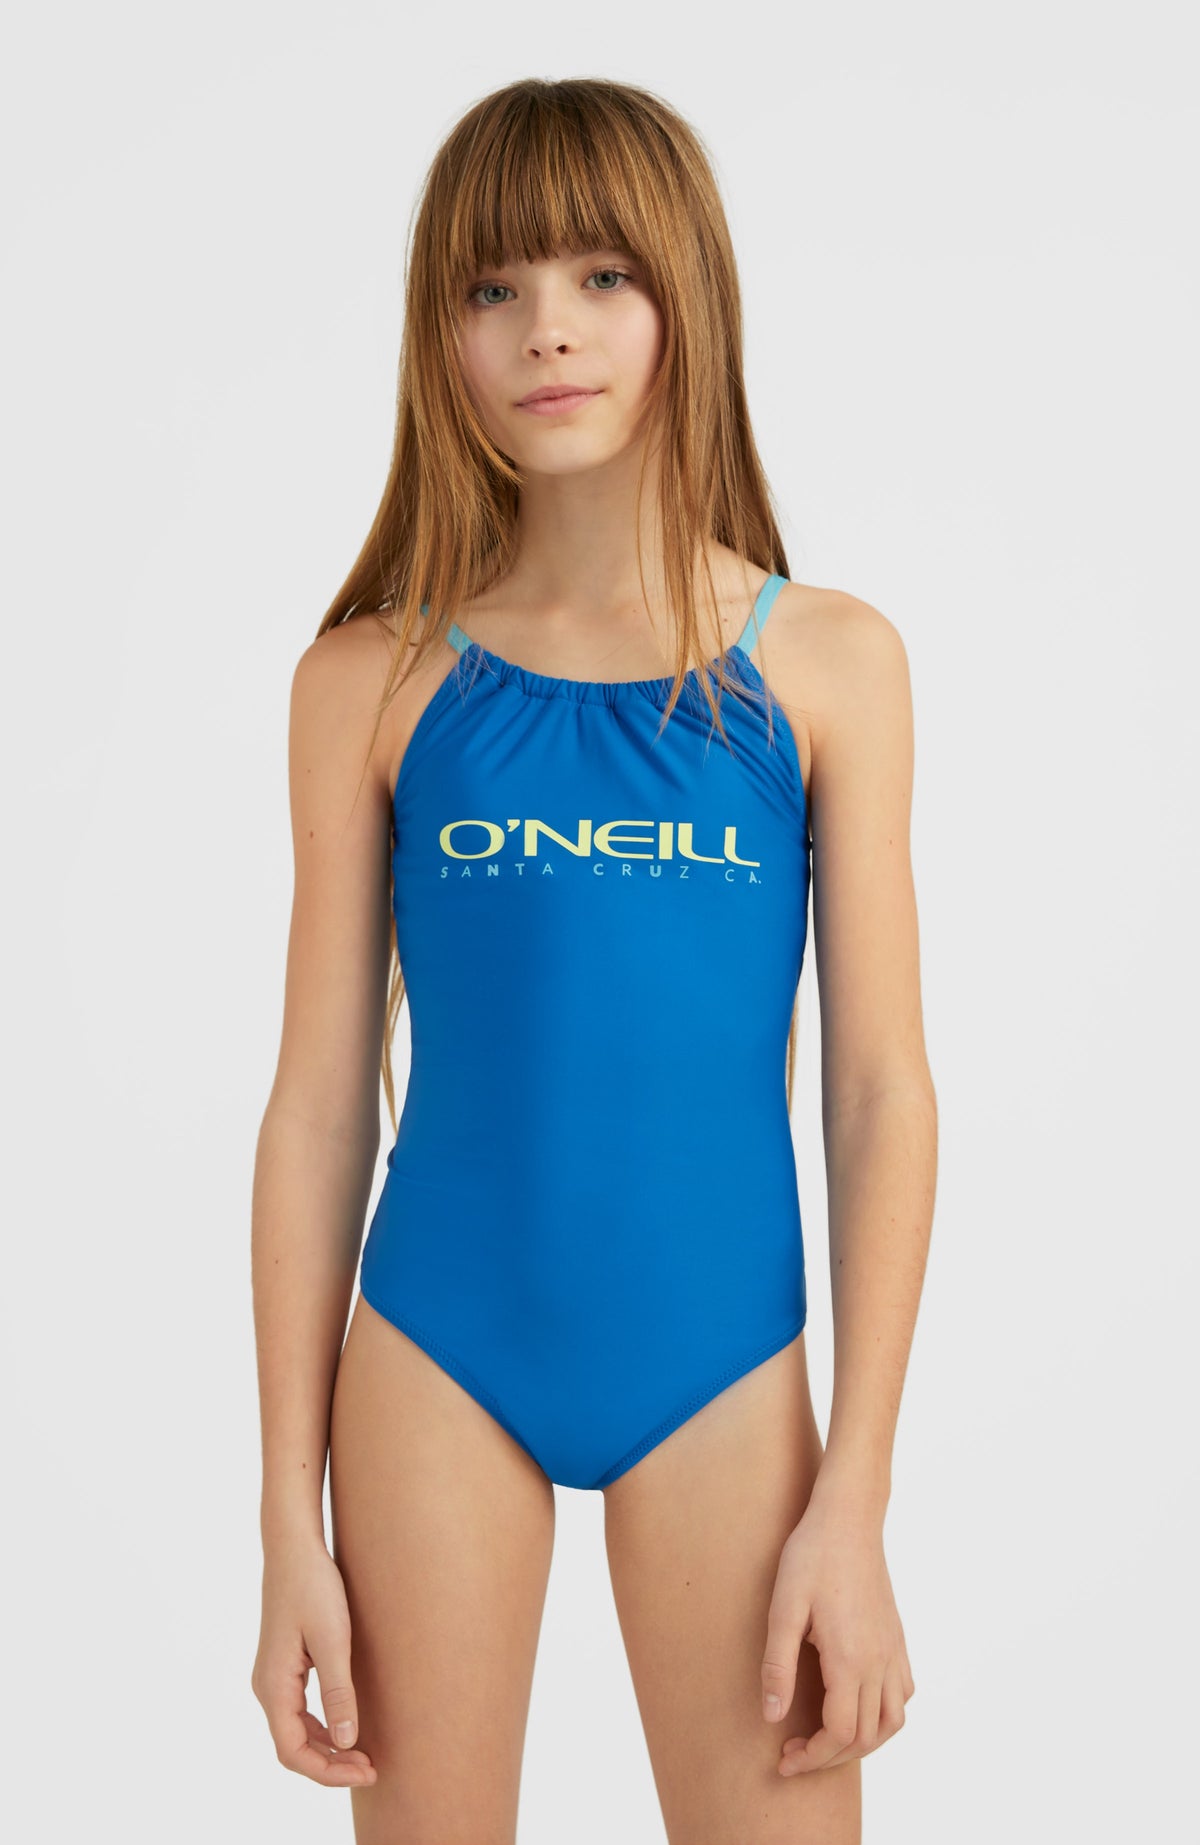 Women's Blue Swimsuit, one piece & two pieces